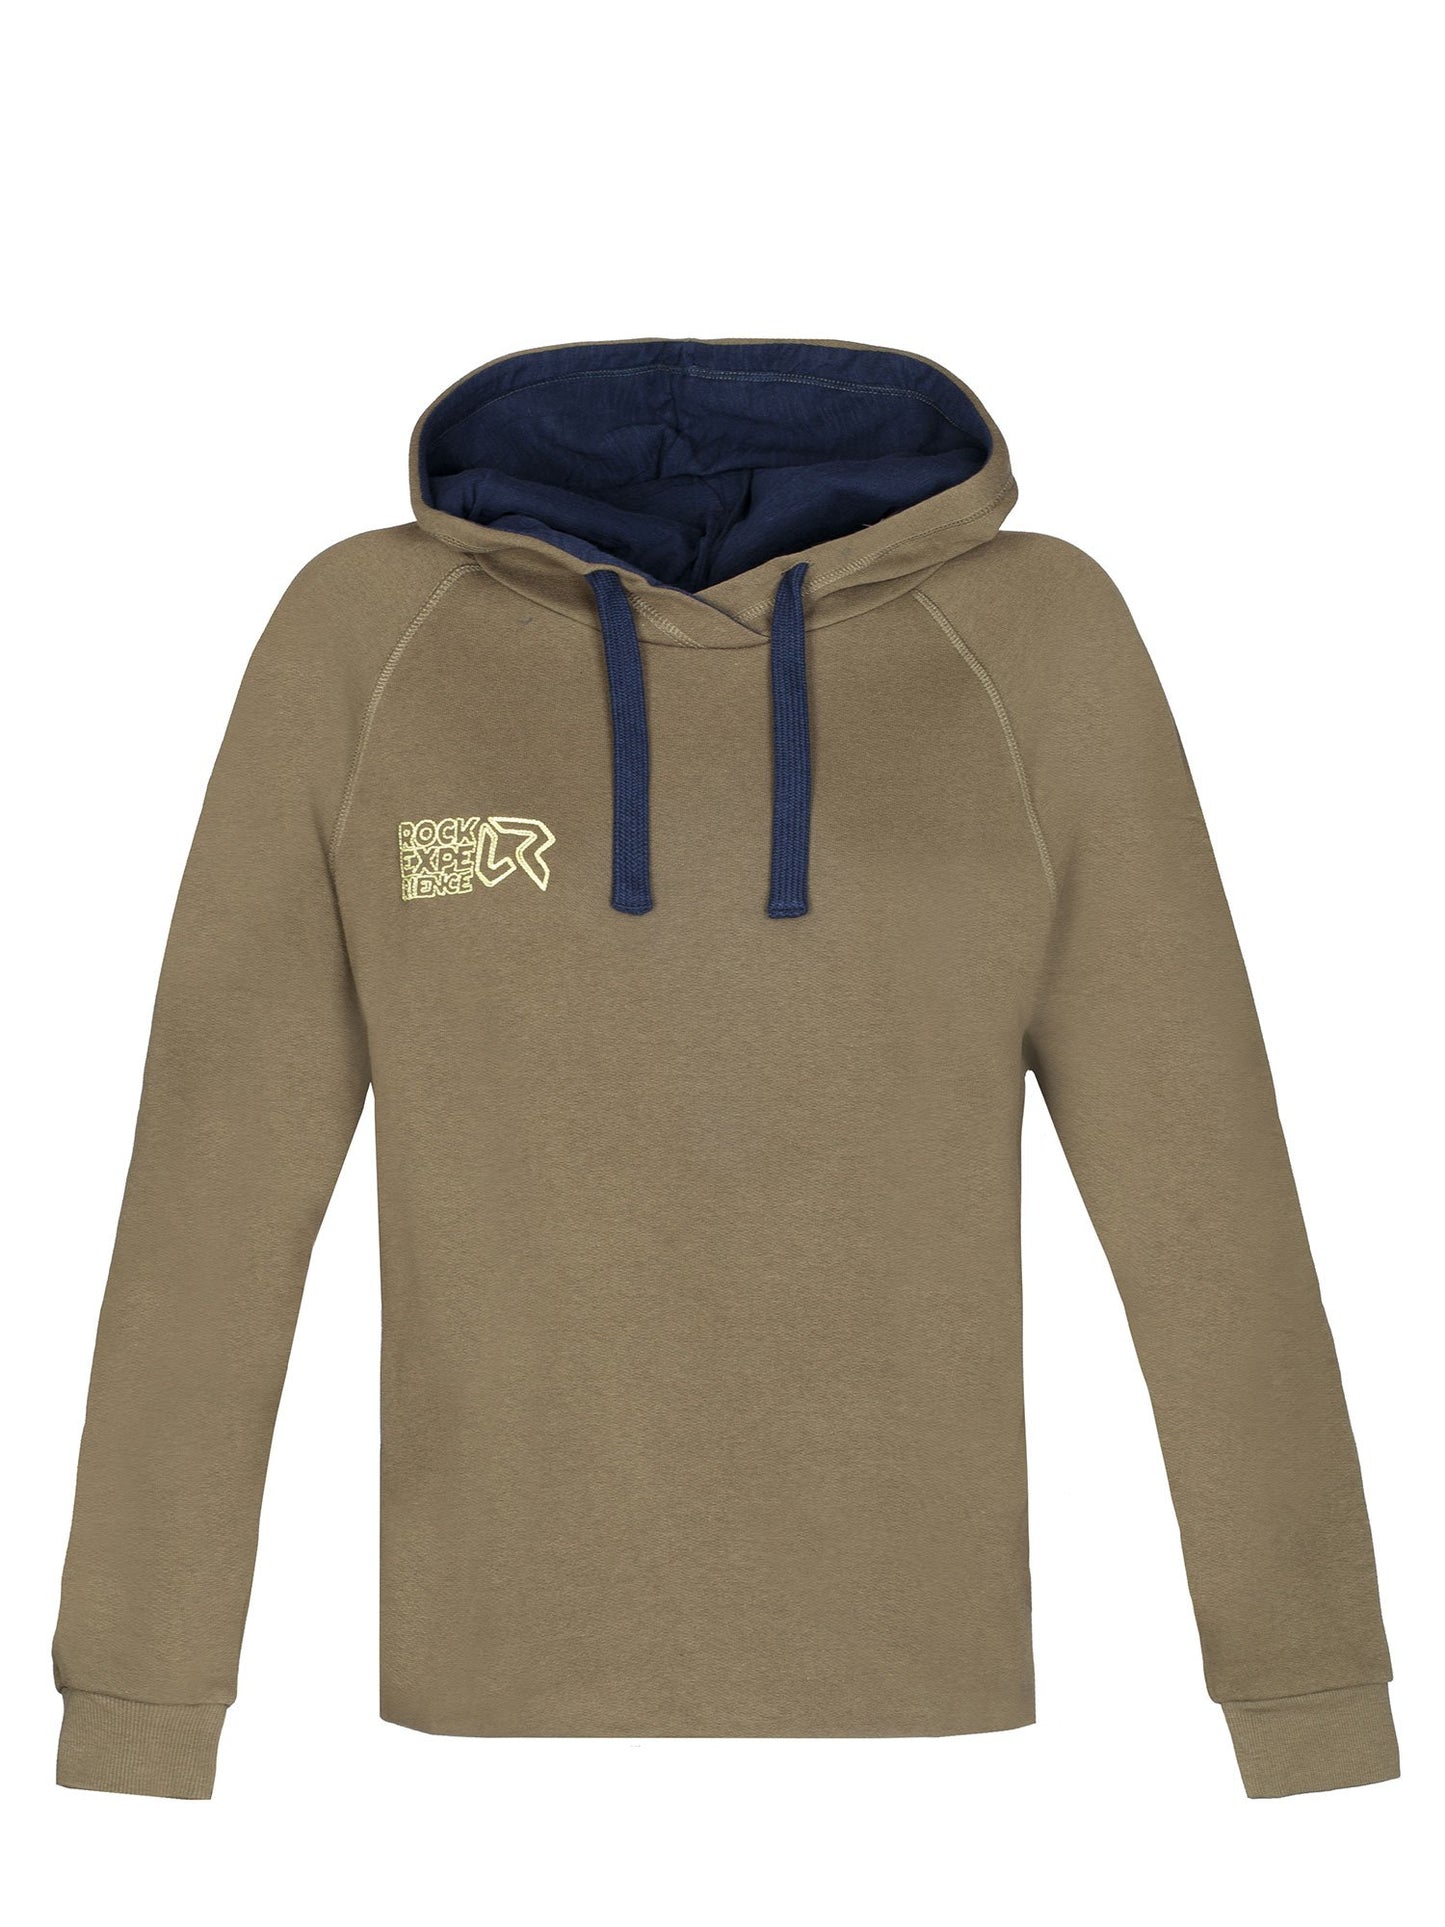 AMPLESSO COMPLESSO HOODIE WOMAN FLEECE